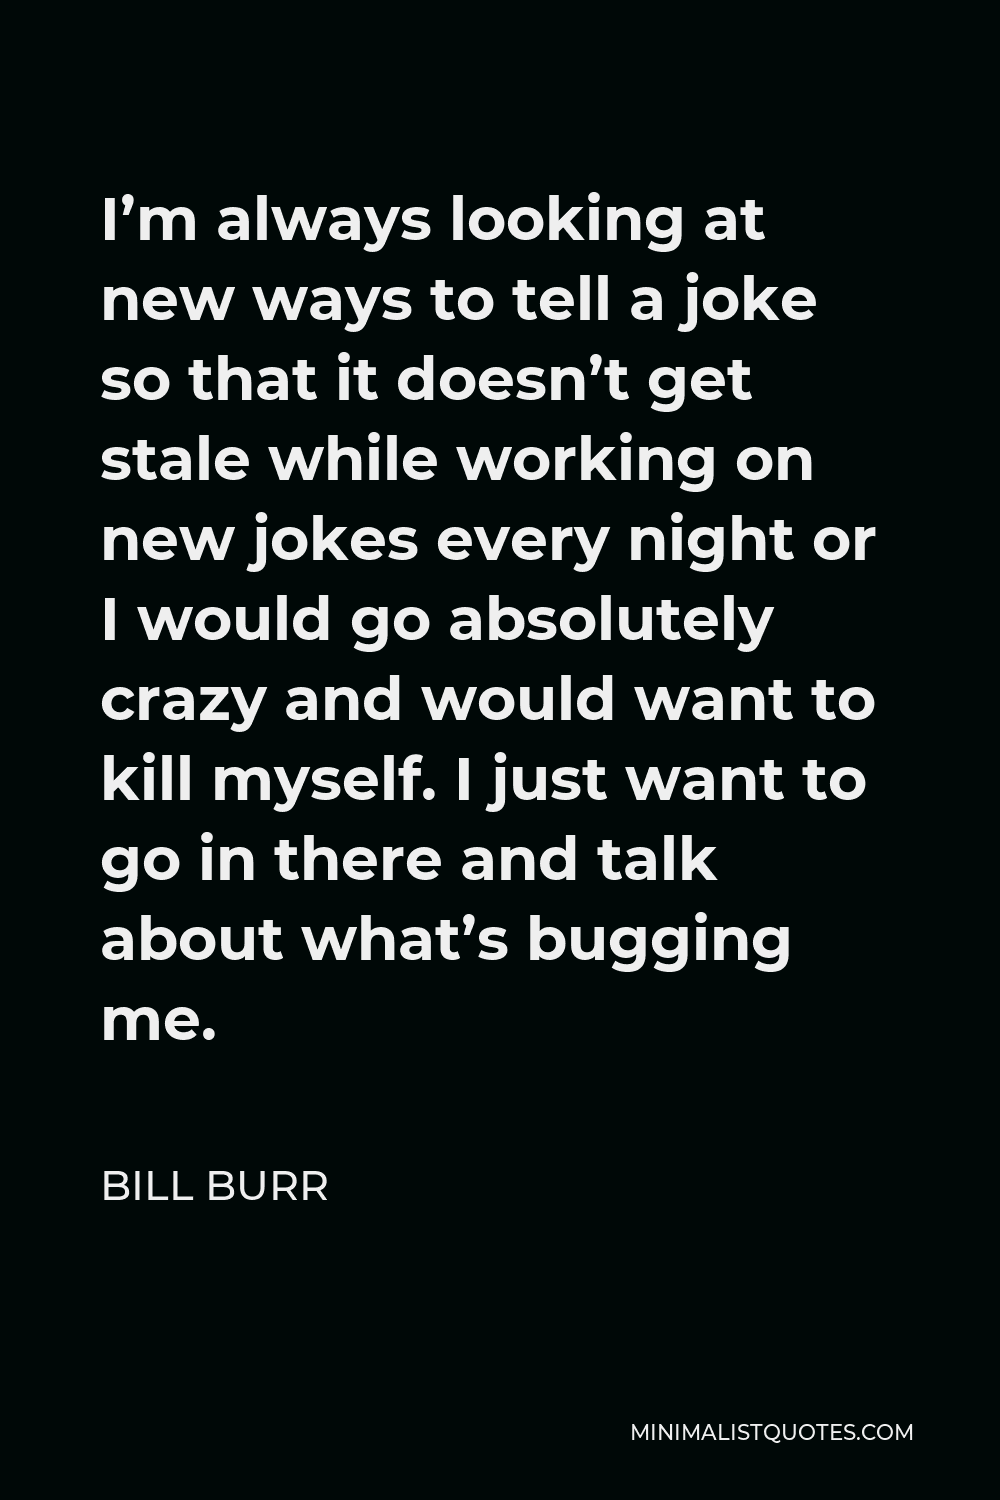 Bill Burr Quote - I’m always looking at new ways to tell a joke so that it doesn’t get stale while working on new jokes every night or I would go absolutely crazy and would want to kill myself. I just want to go in there and talk about what’s bugging me.